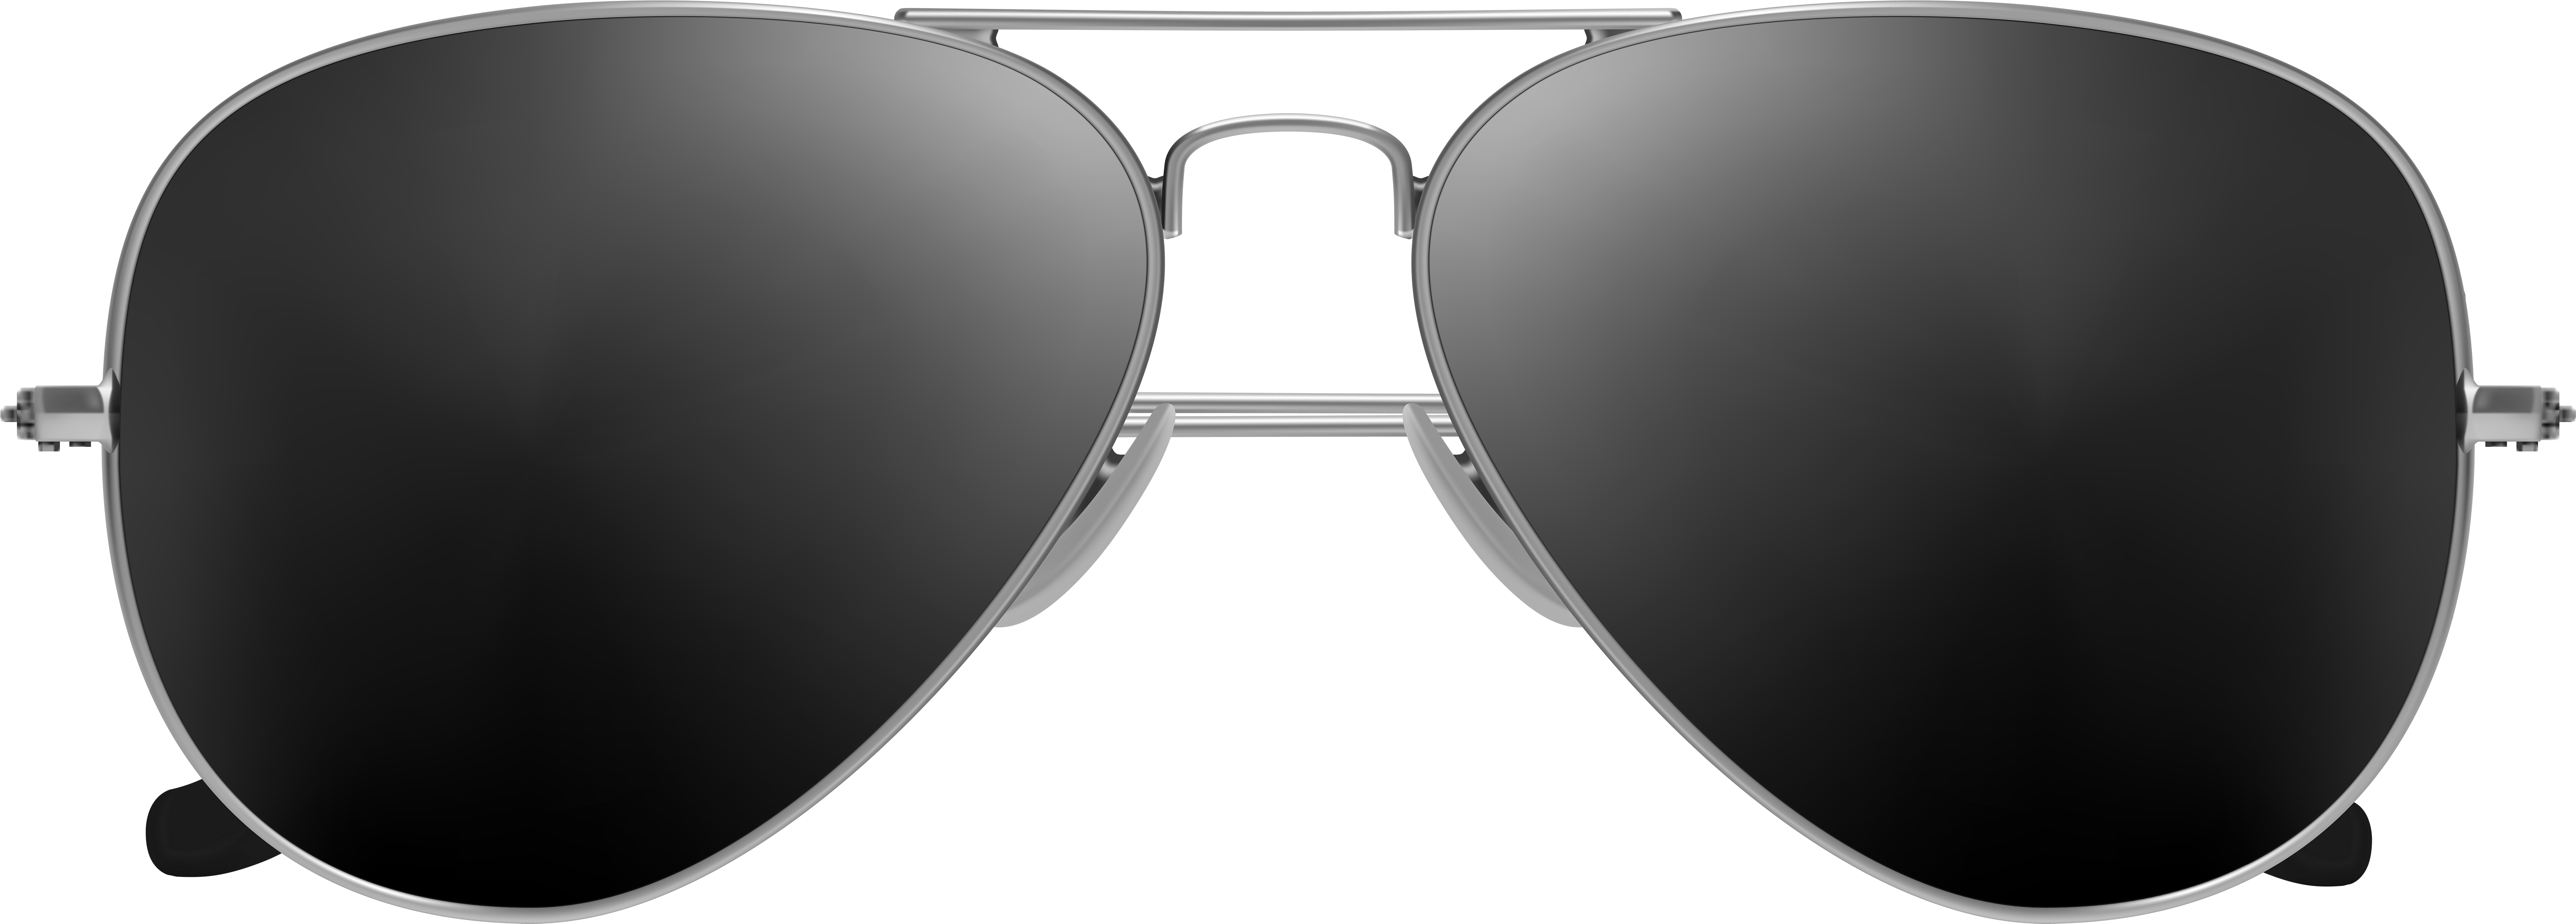 Sun Glasses Png Transparent Background Sunglasses Png, Png Download Is ...